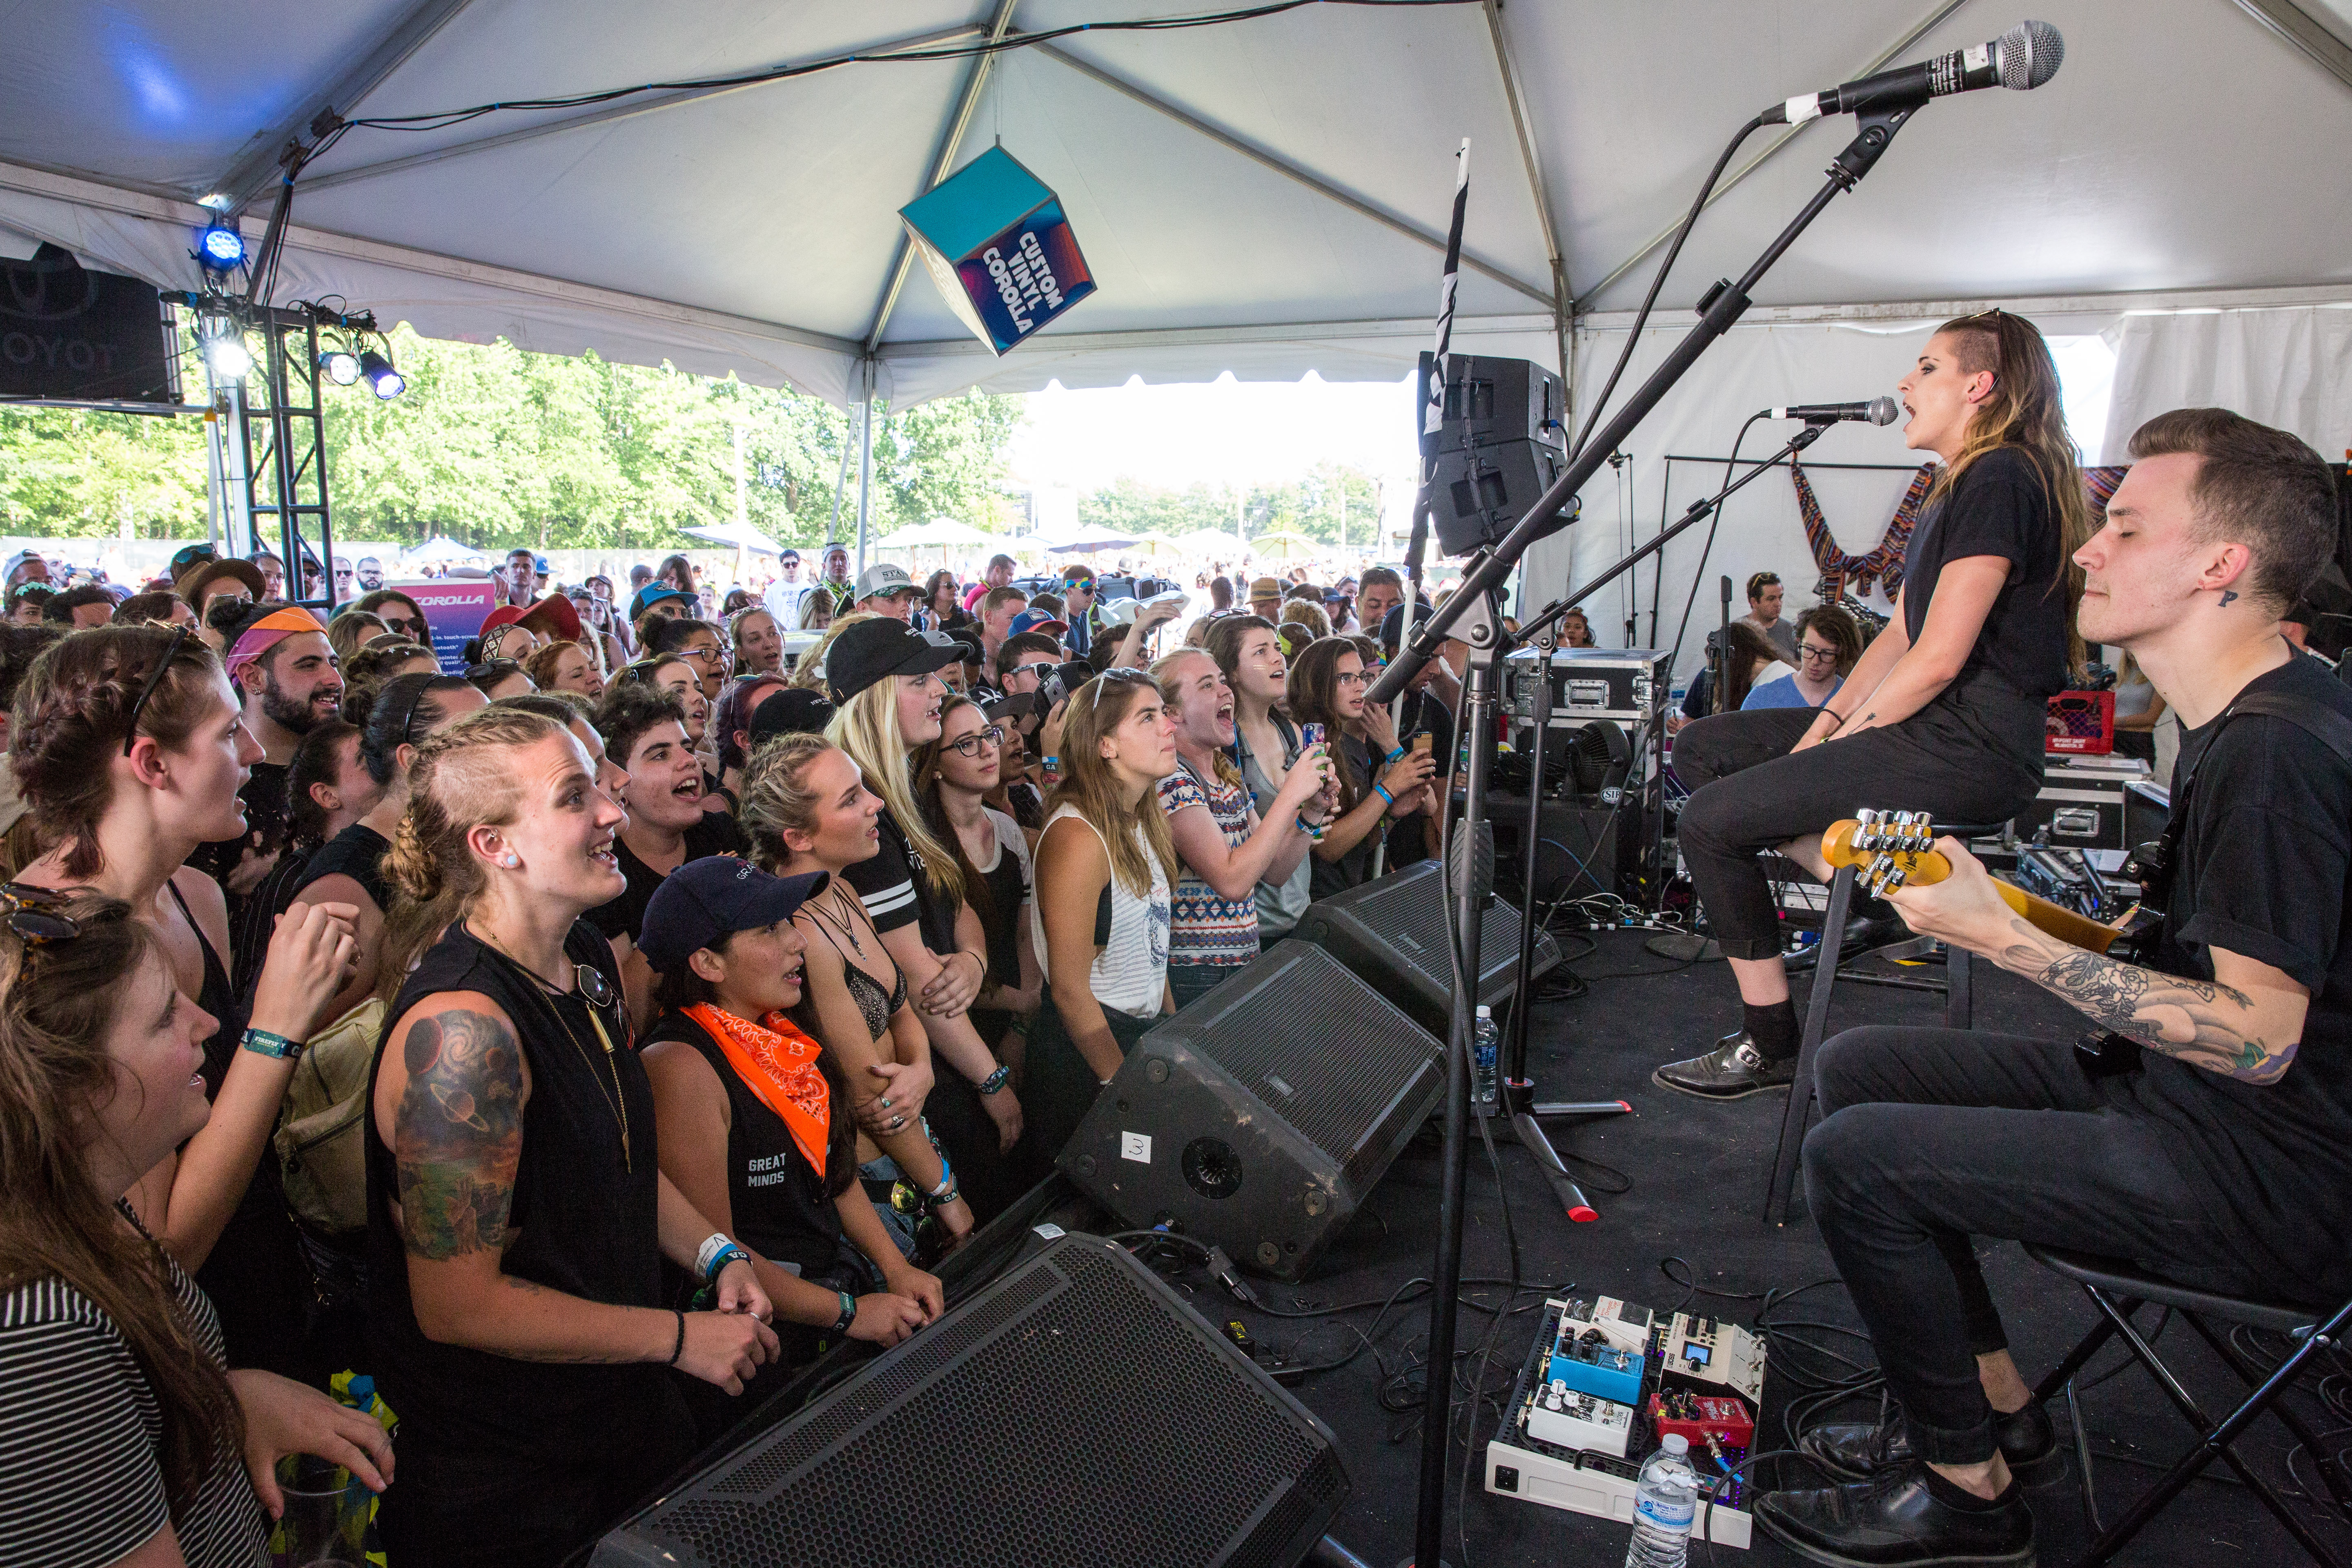 SPIN at Firefly 2016: Day 2 at Toyota Music Den with PVRIS, Quilt, and More